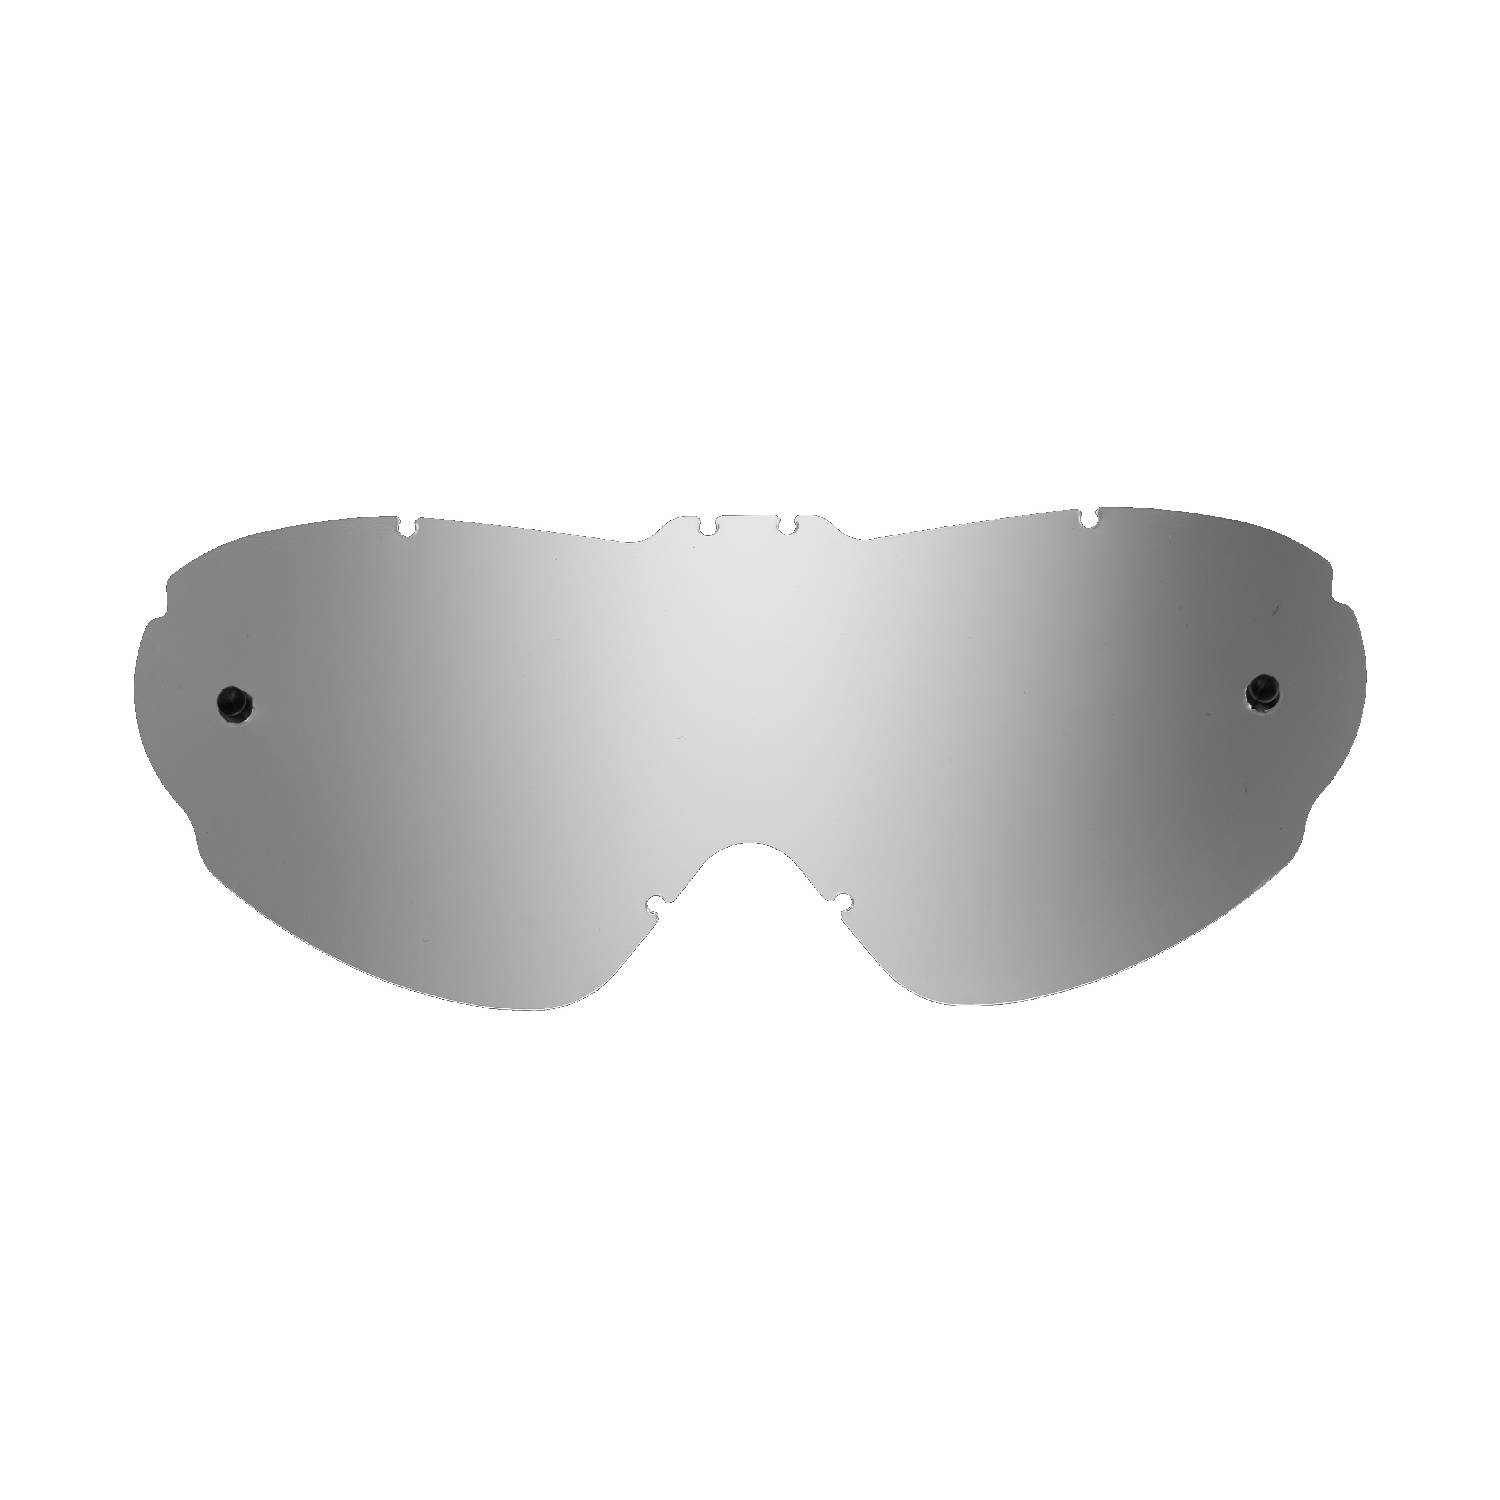 silver-toned mirrored replacement lenses for goggles compatible for Scott Hi voltage work goggle